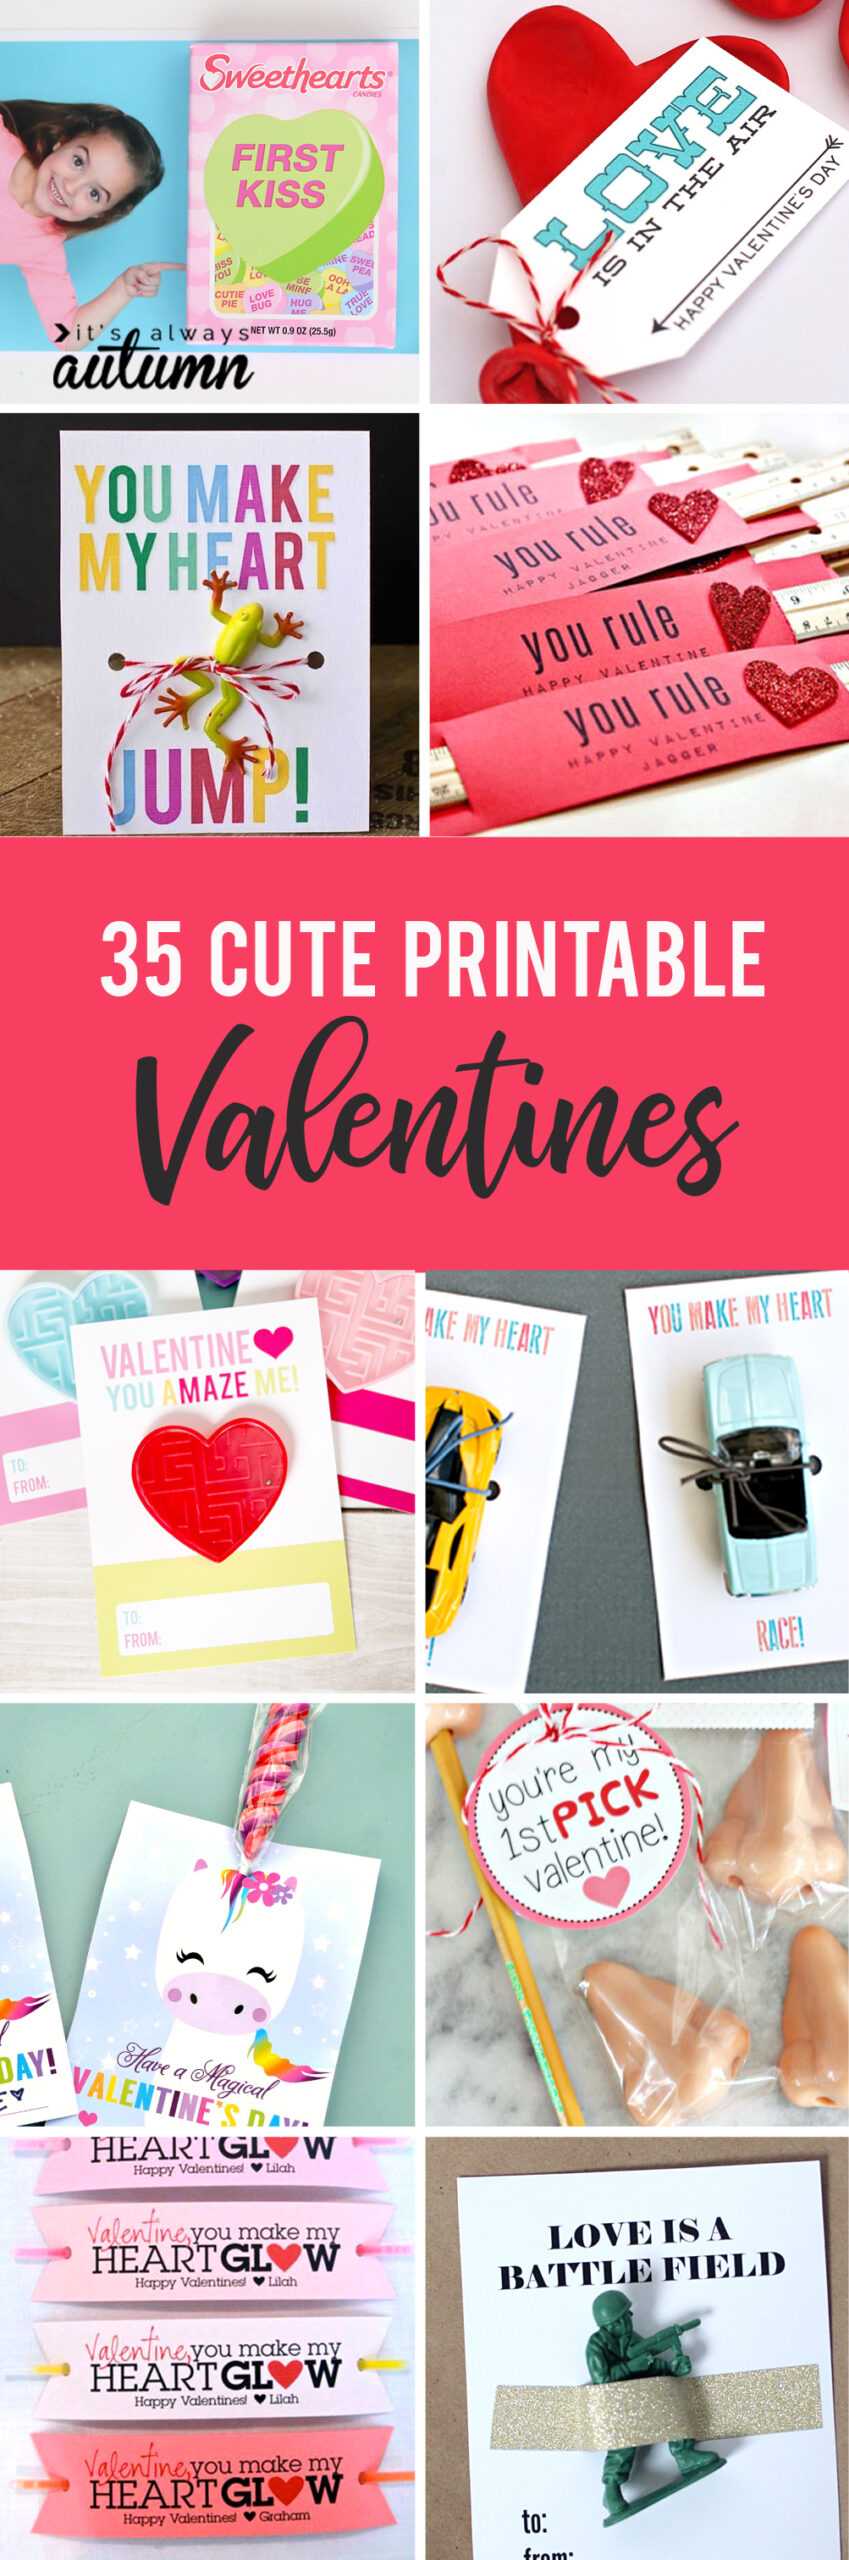 35 Adorable Diy Valentine's Cards To Print At Home For Your Inside Valentine Card Template For Kids